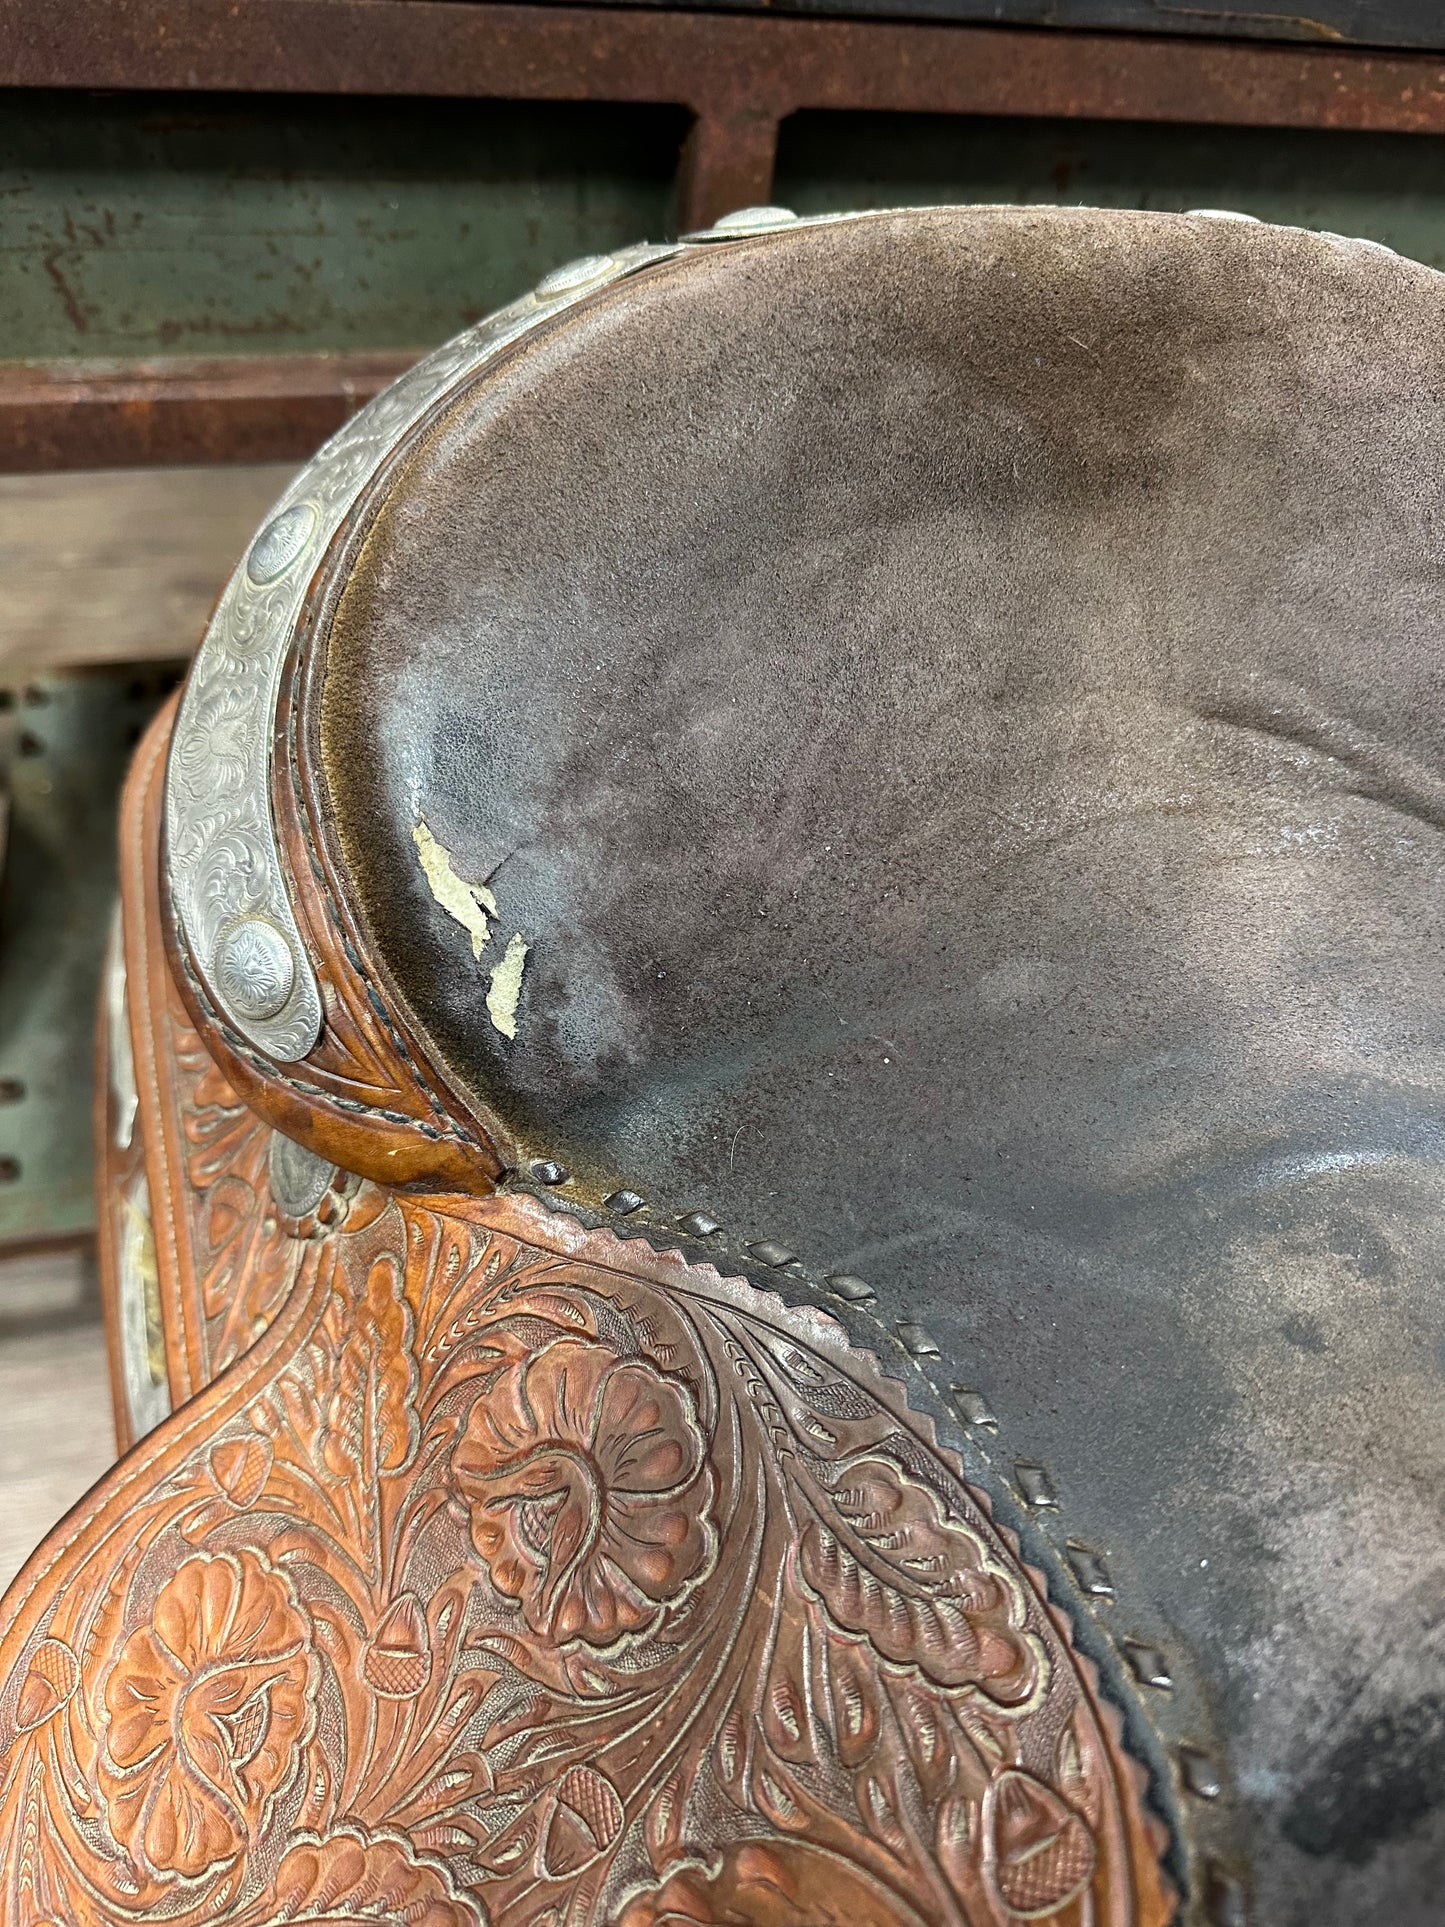 15" Custom Show Saddle by Kathy's Show Equipment